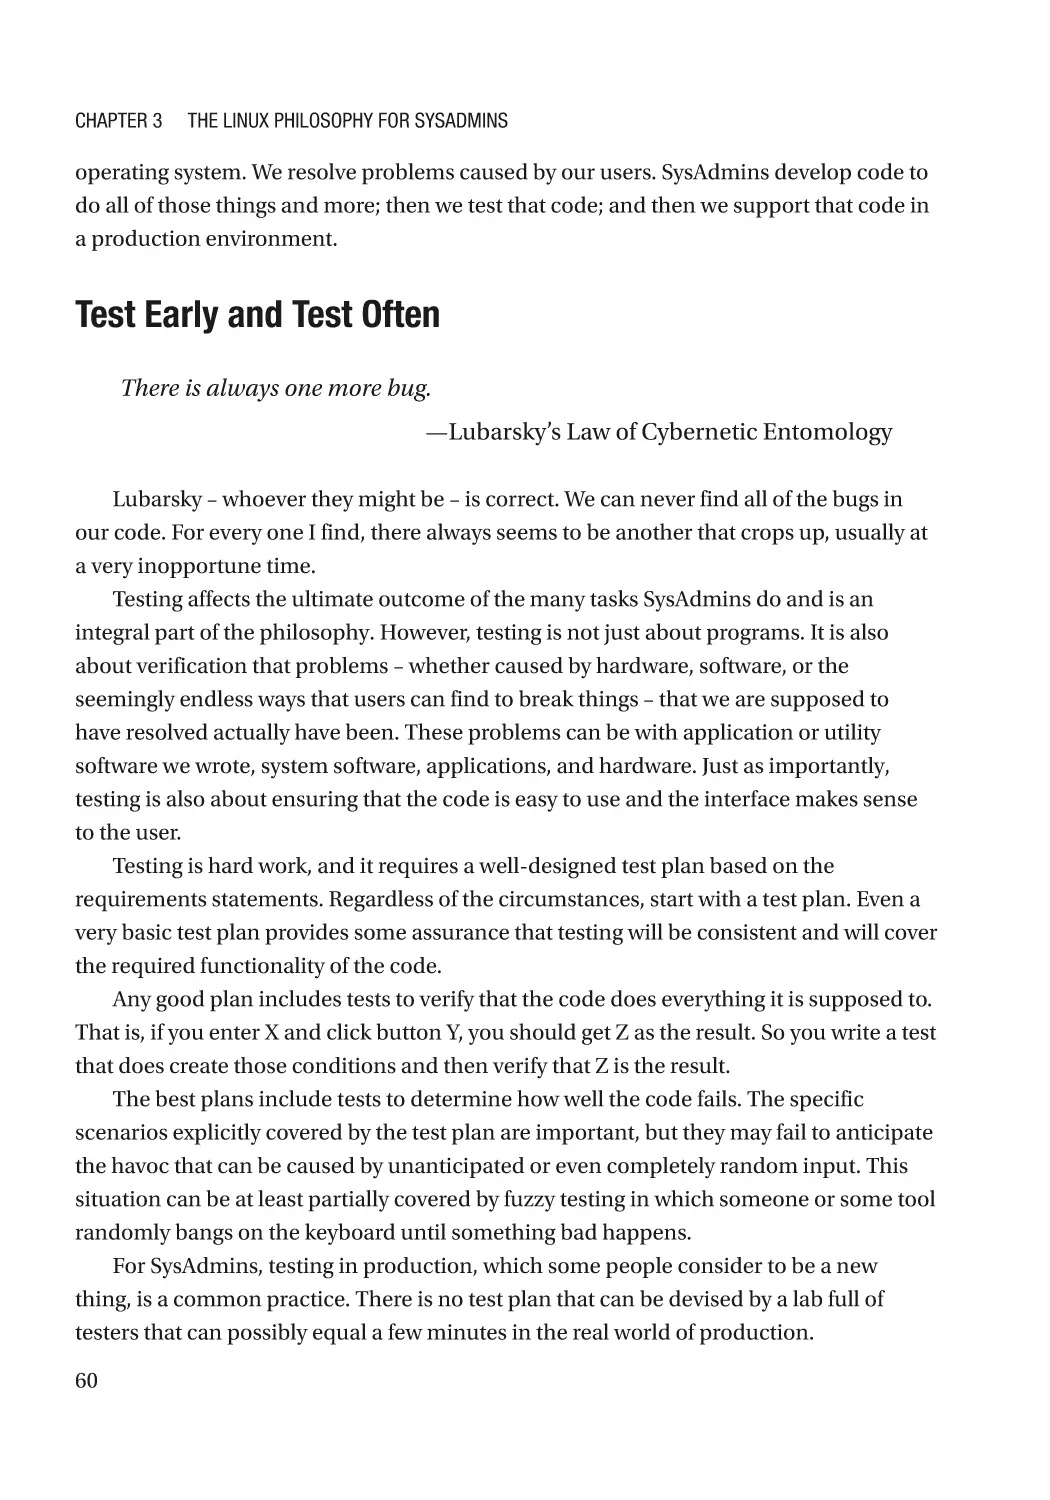 Test Early and Test Often